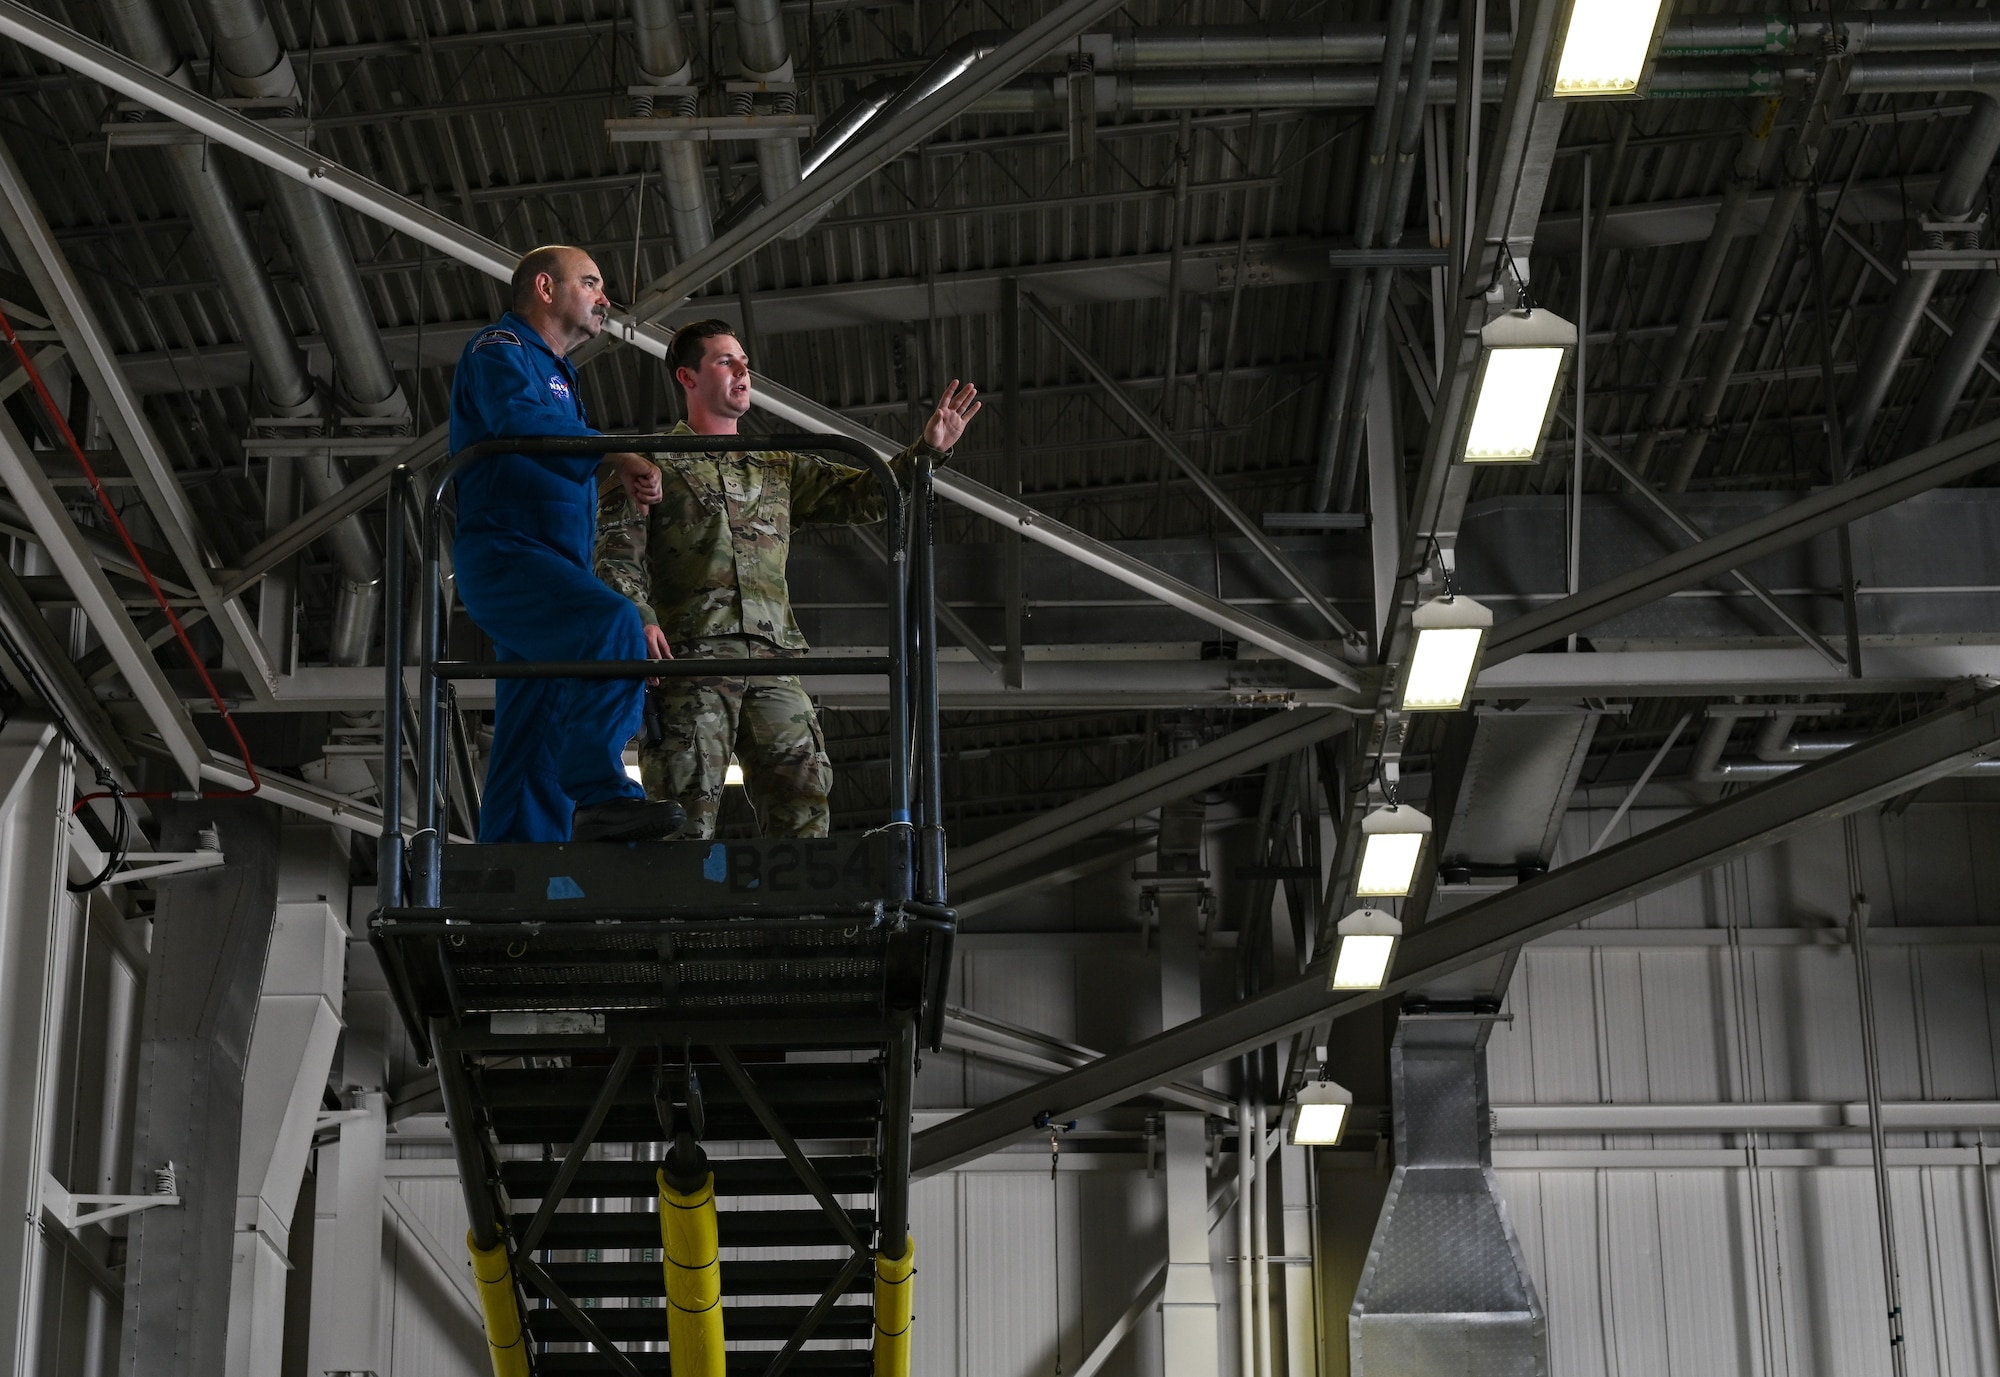 U.S. Air Force Senior Airman Broden Duff, 509th Aircraft Maintenance Squadron crew chief and Tom Parent, NASA Aircraft Operations pilot, look over the B-2 Spirit at Whiteman Air Force Base, Missouri, June 7, 2022. NASA and the 509th Bomb Wing engaged in cross-organizational communication, discussing common mission components between the two organizations. Cross-organizational communication broadens organizations’ scopes and prevents blind spots.